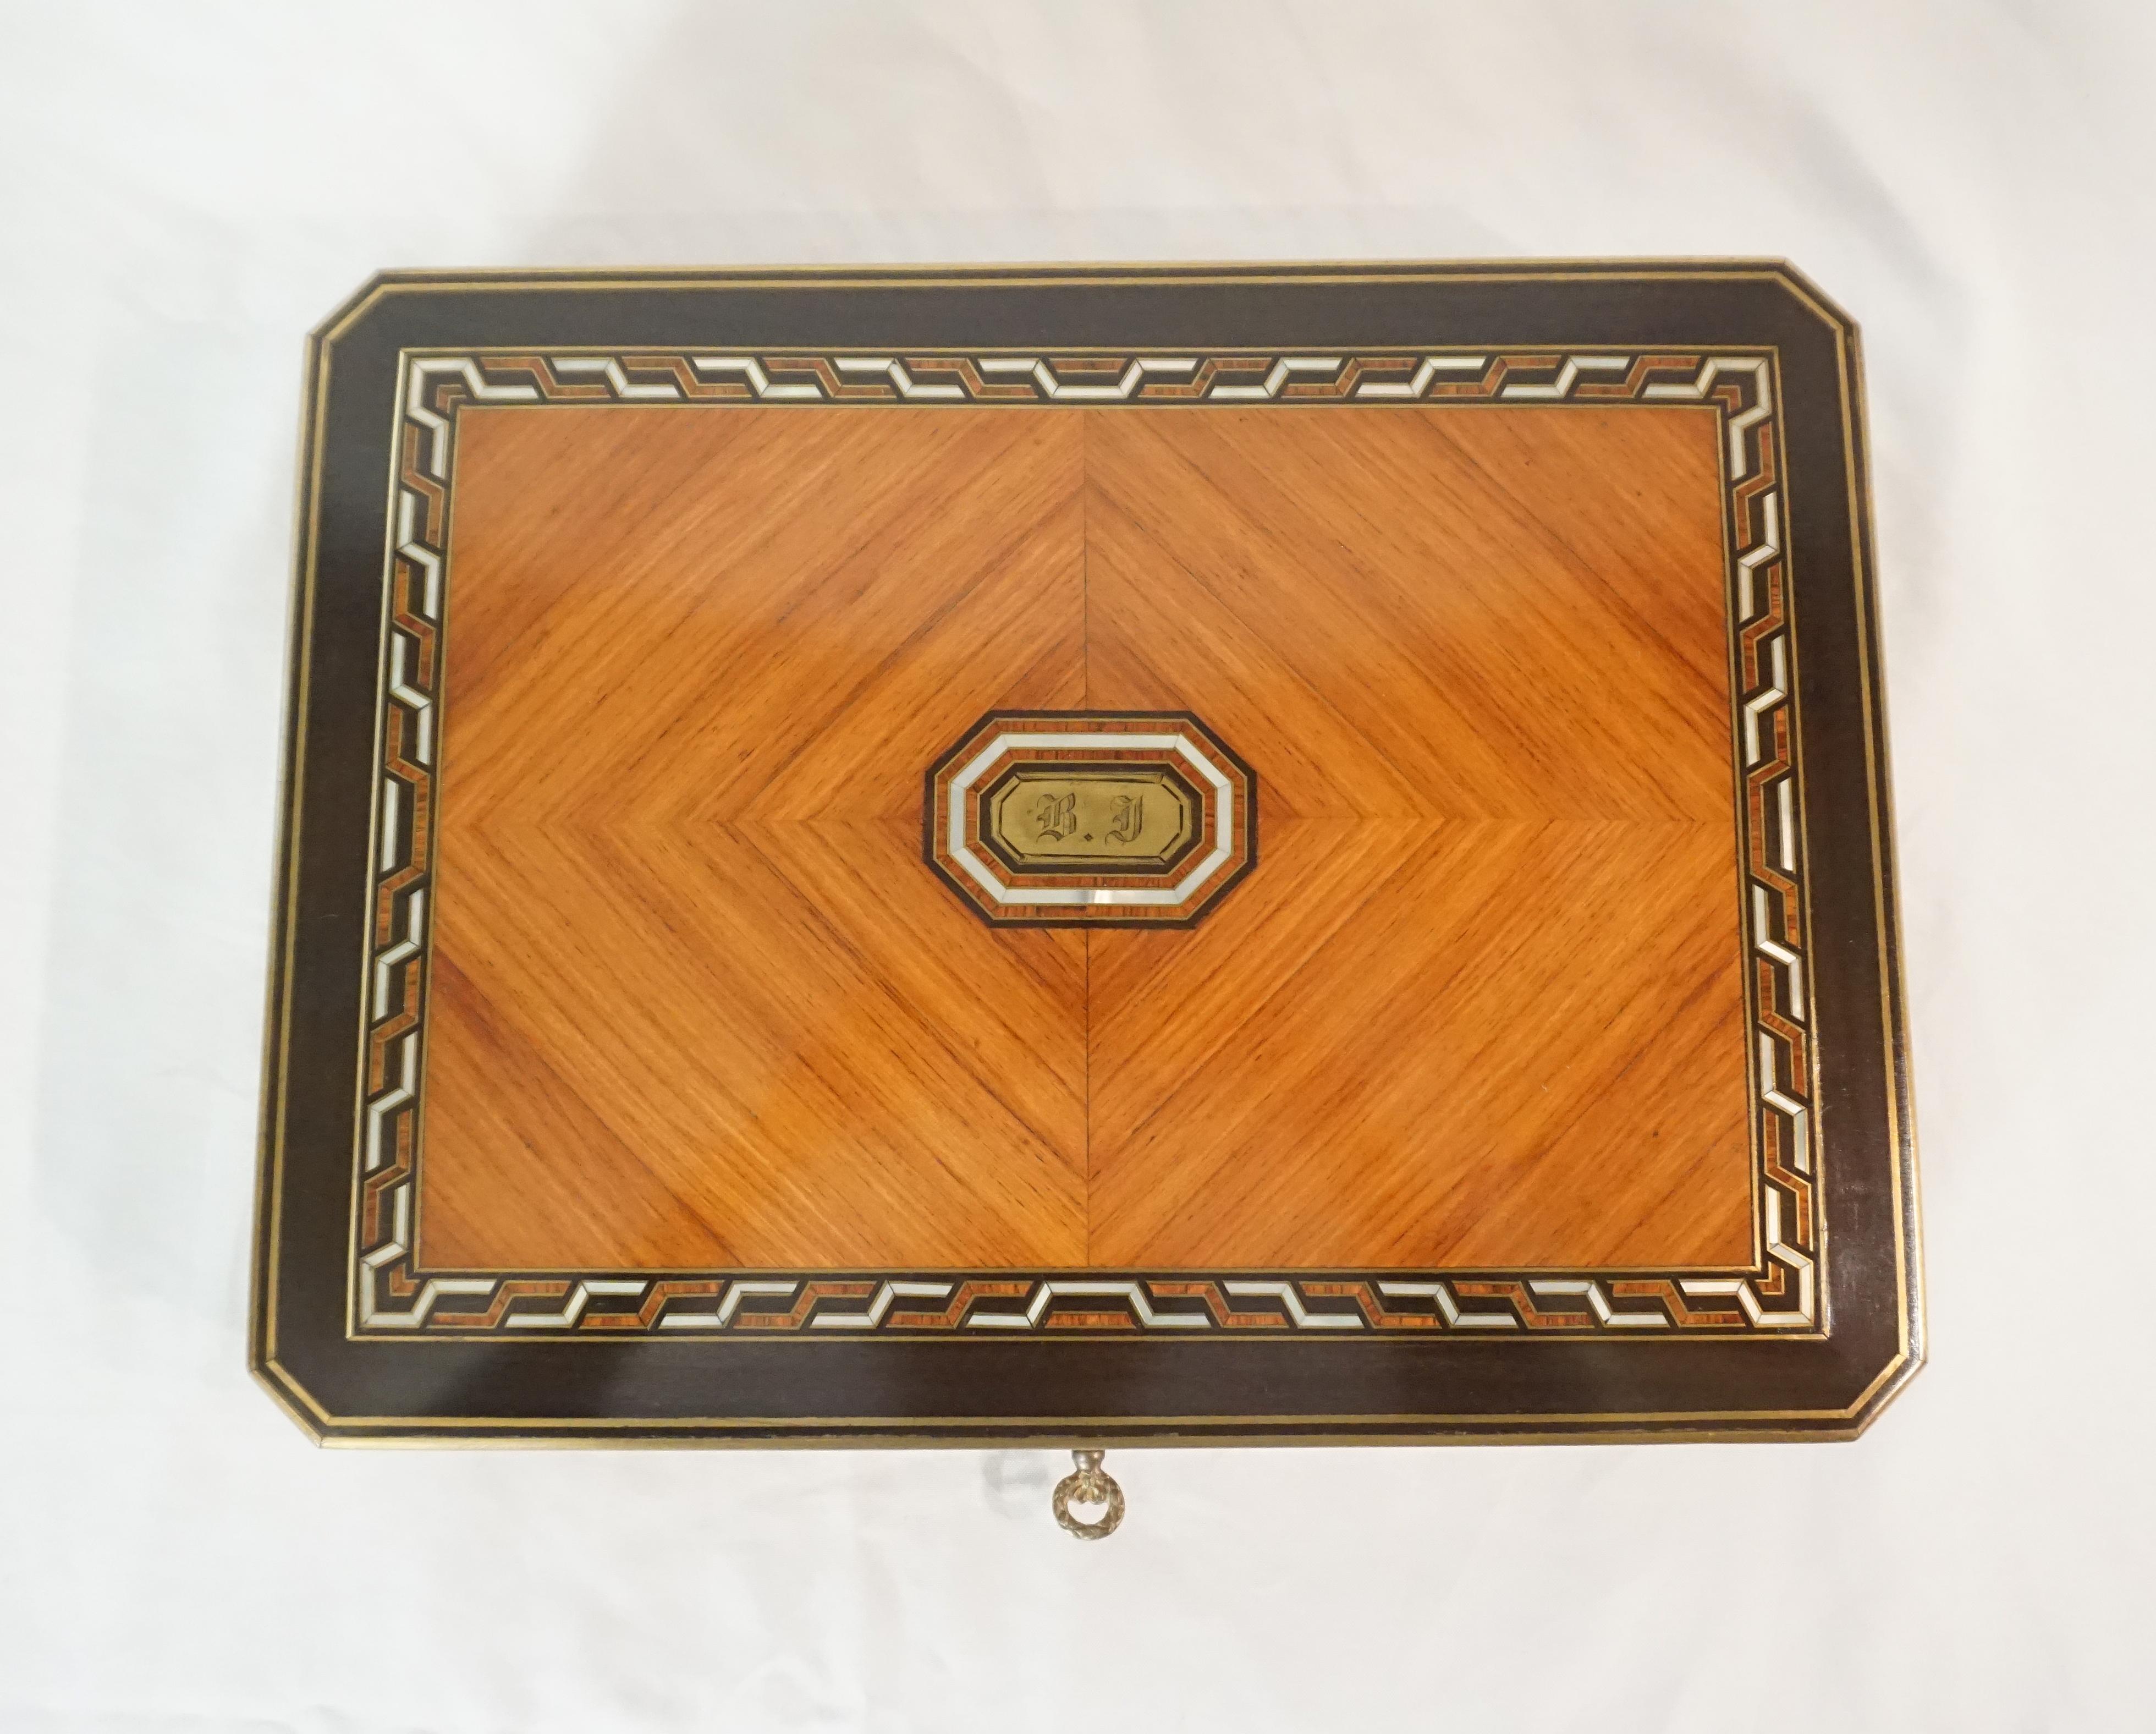 An exquisite Swiss, circa 1890, games box of rectangular form with canted edges; the slightly domed top with brass and ebony inlaid perimeters surrounding geometric nacre (mother-of-pearl), ebony, and brass inlaid border framing book-matched